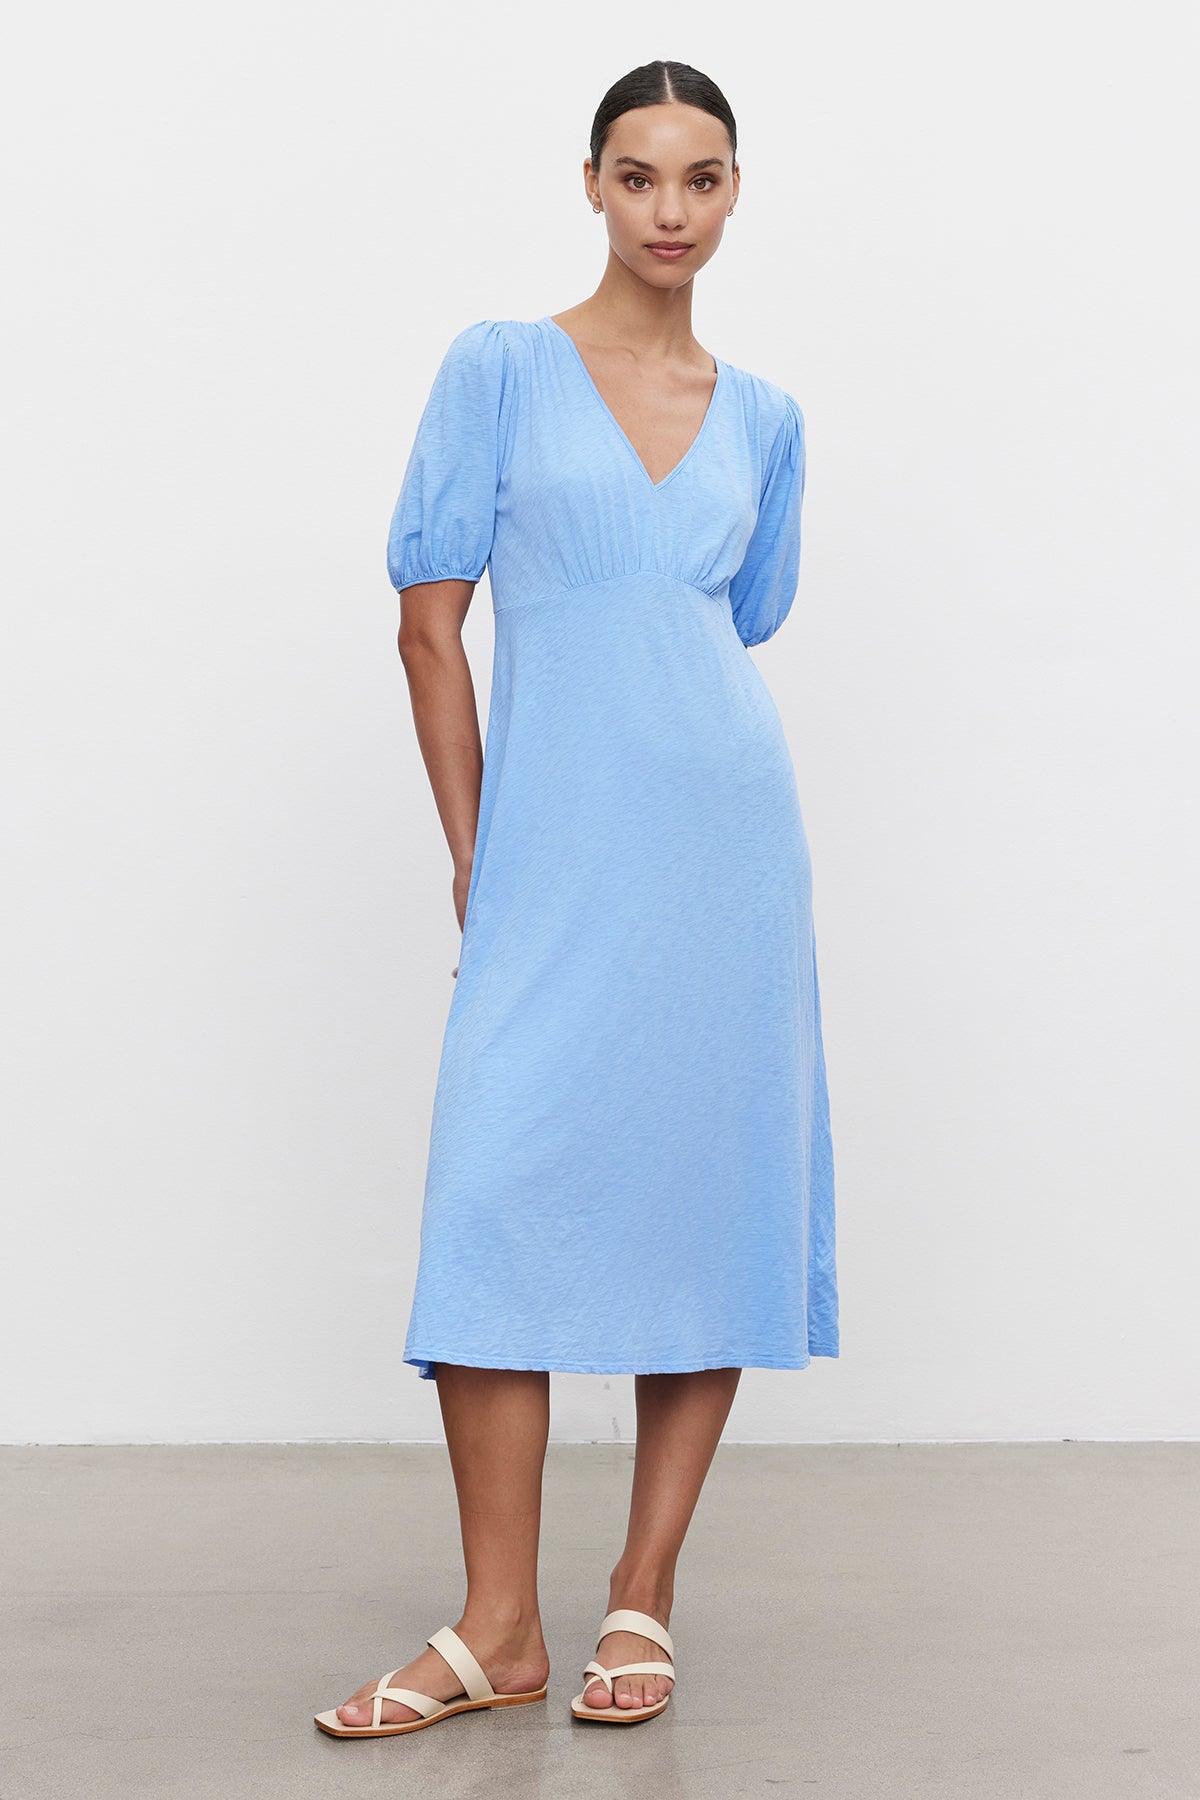 A woman in a Velvet by Graham & Spencer PARKER COTTON SLUB MIDI DRESS with puff sleeves and a v-neckline, paired with white sandals, stands against a white background.-36691474743489